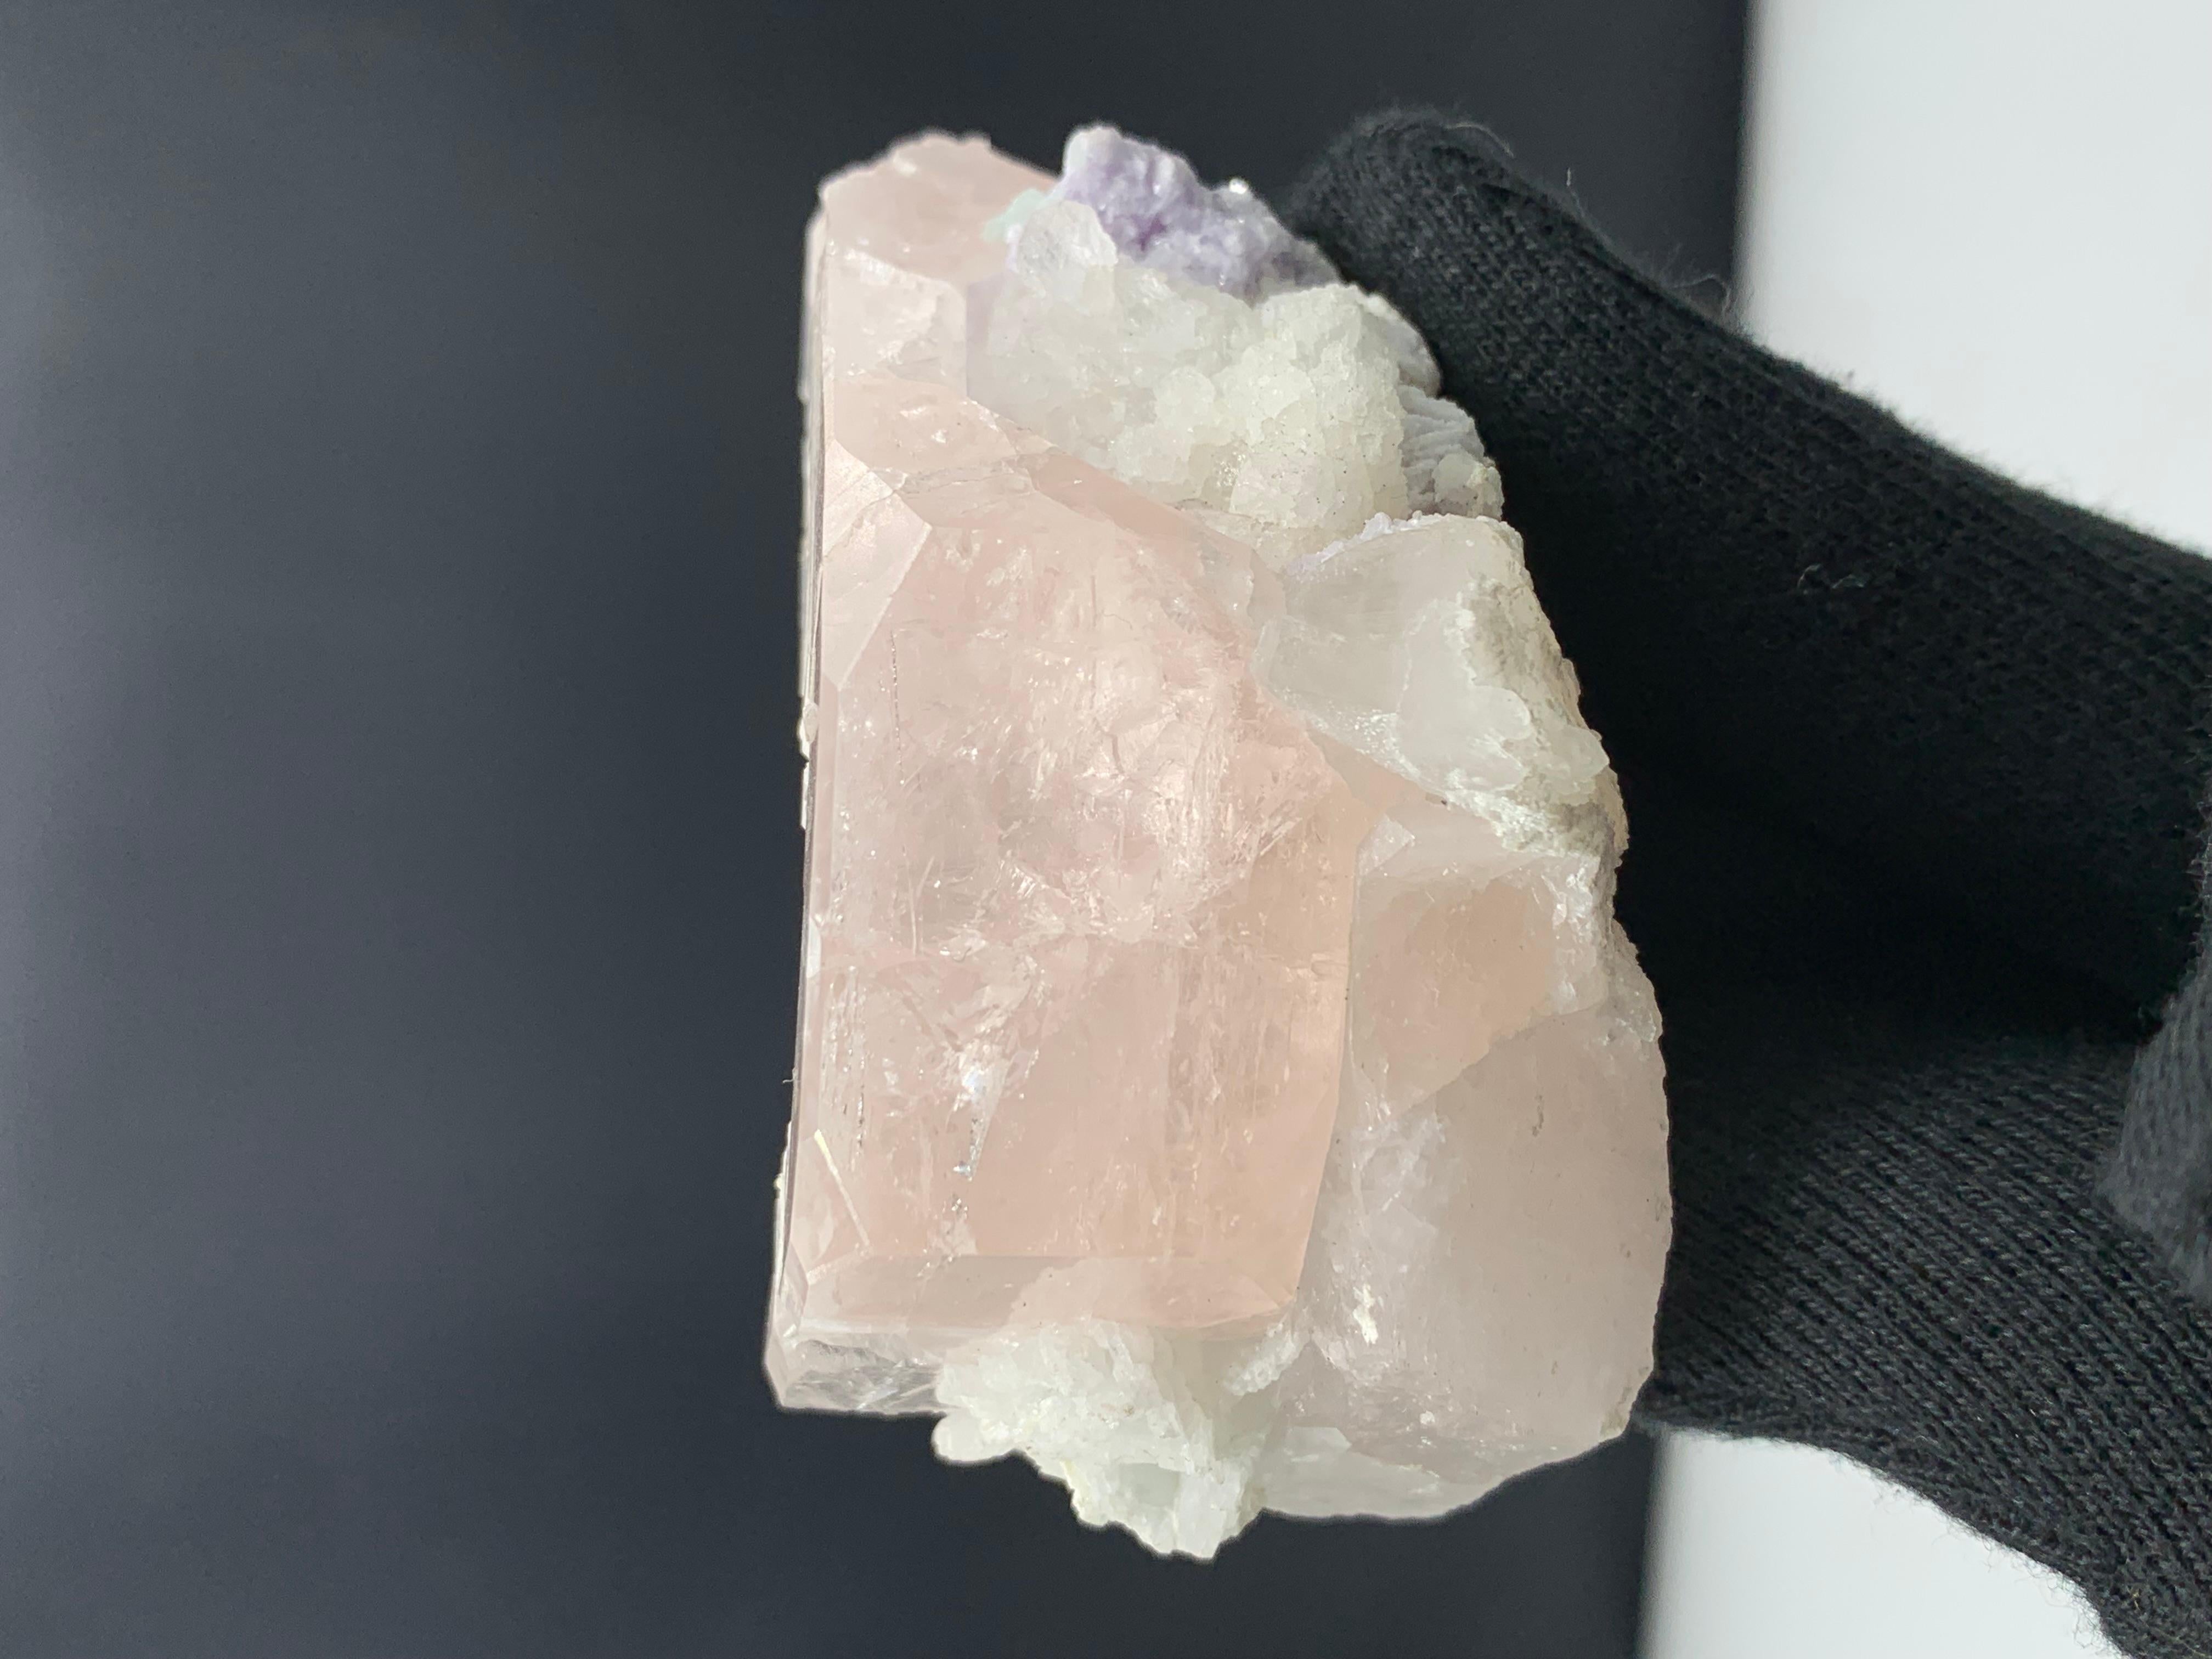 160.04 Gram Gorgeous Morganite Specimen Attached With Albite And Fluorite 

Weight: 160.04 Gram
Dimension: 3.9 x 7.4 x 4.3 Cm
Origin: Kunar, Afghanistan 

With its soft pinkish hue, morganite is often associated with innocence, sweetness, romance